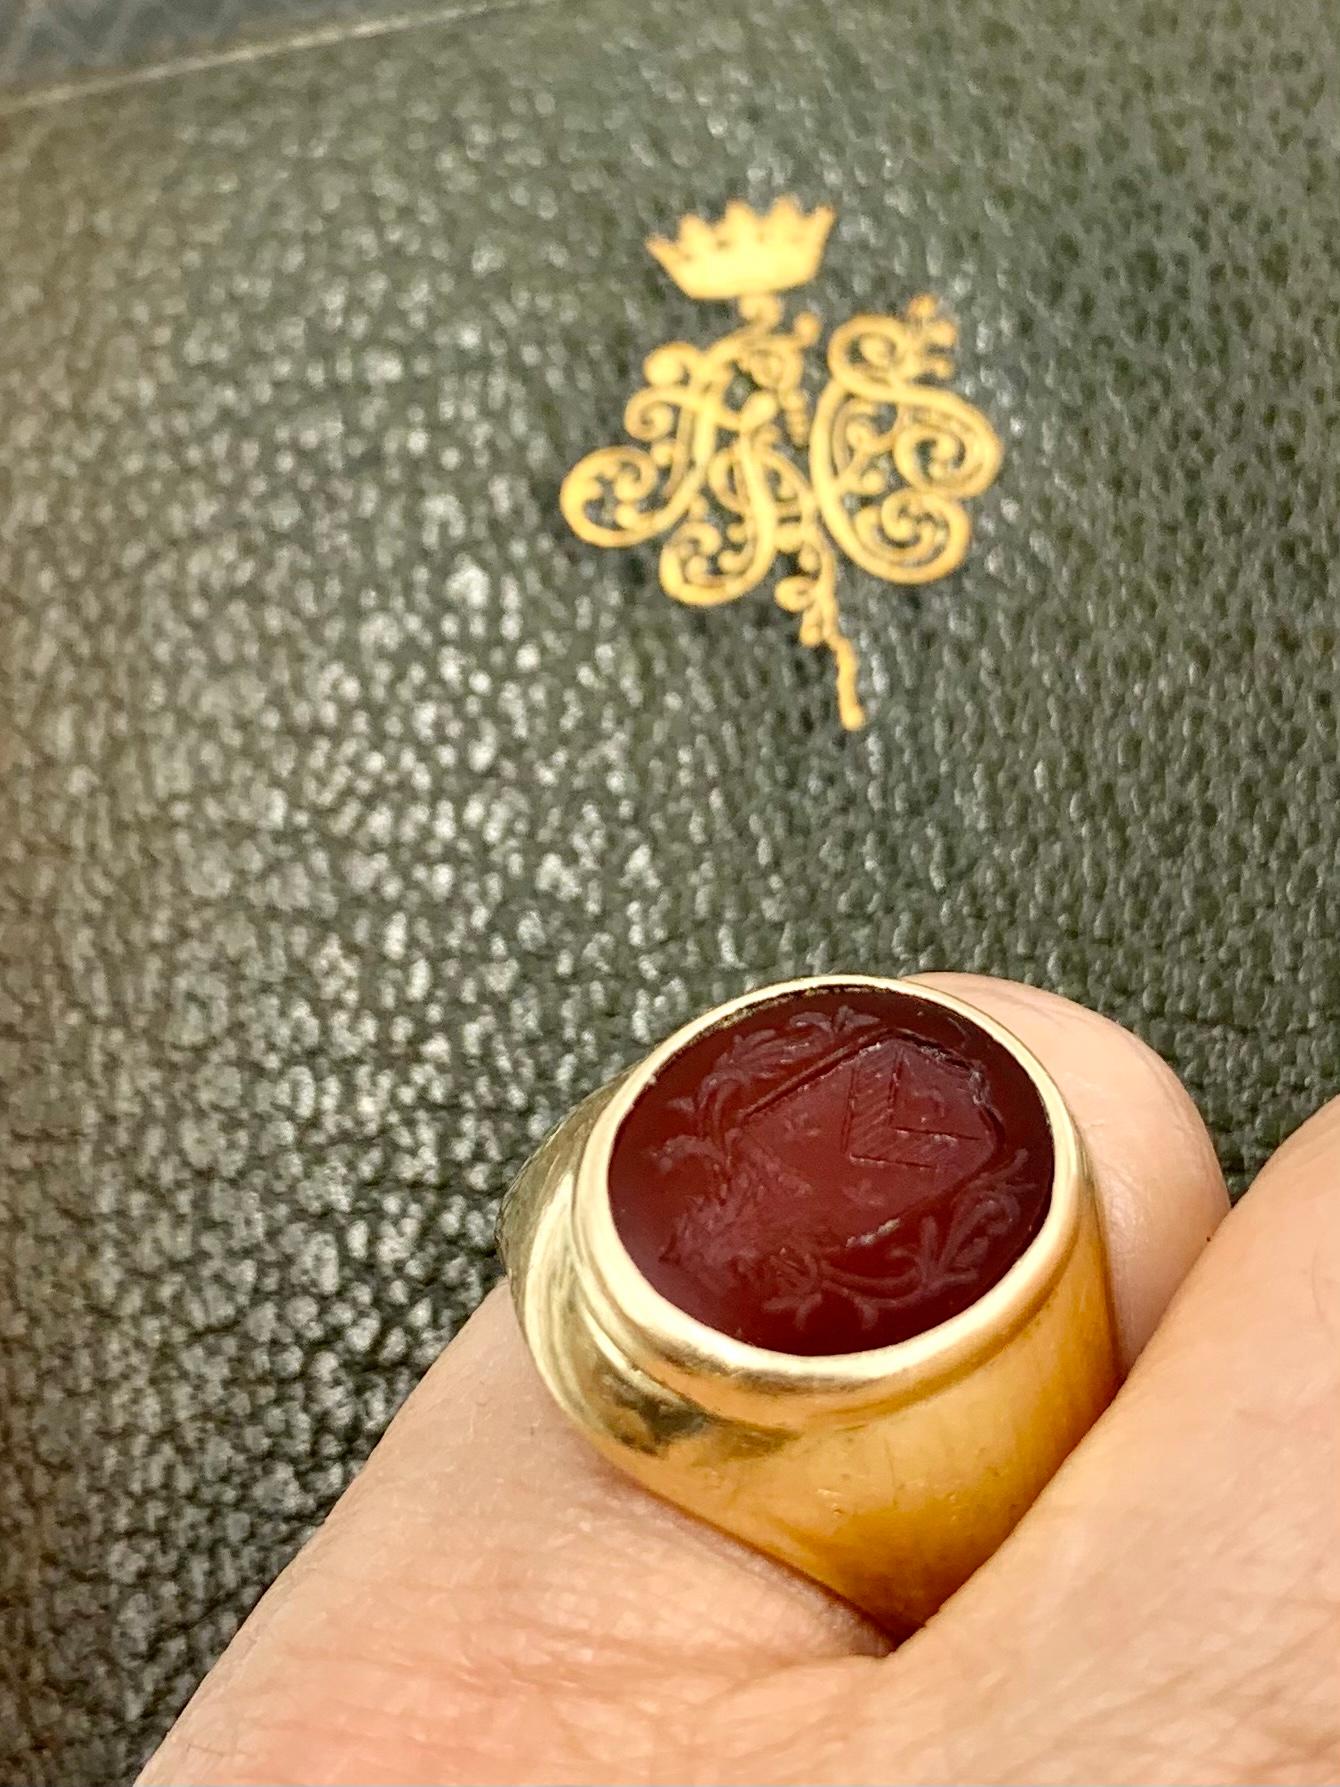 Fine antique Tiffany & Co. 14K gold signet ring with a beautifully engraved carnelian intaglio crest depicting a lion above a shield with two stars, a chevron and a crescent moon. 
Late 19th/ Early 20th Century
excellent estate condition- light